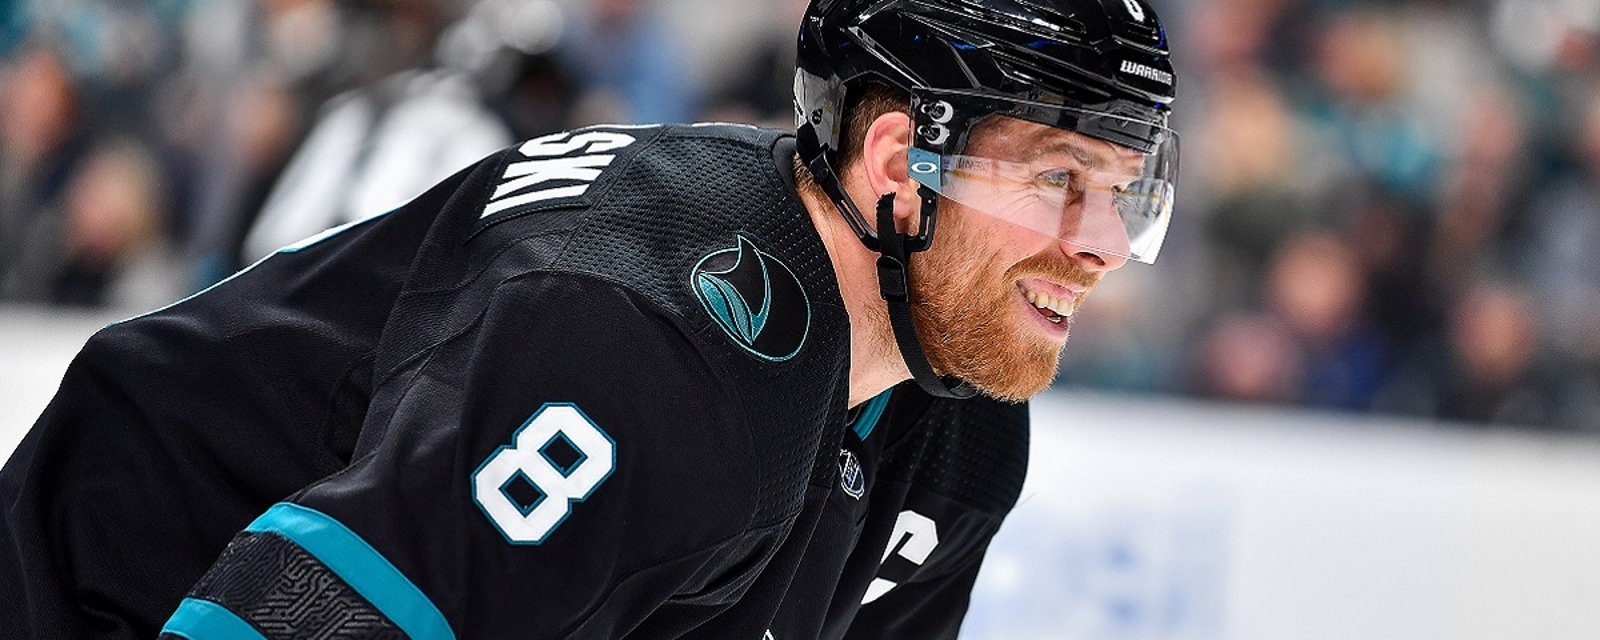 Breaking: Pavelski has been ruled out of Game 6.